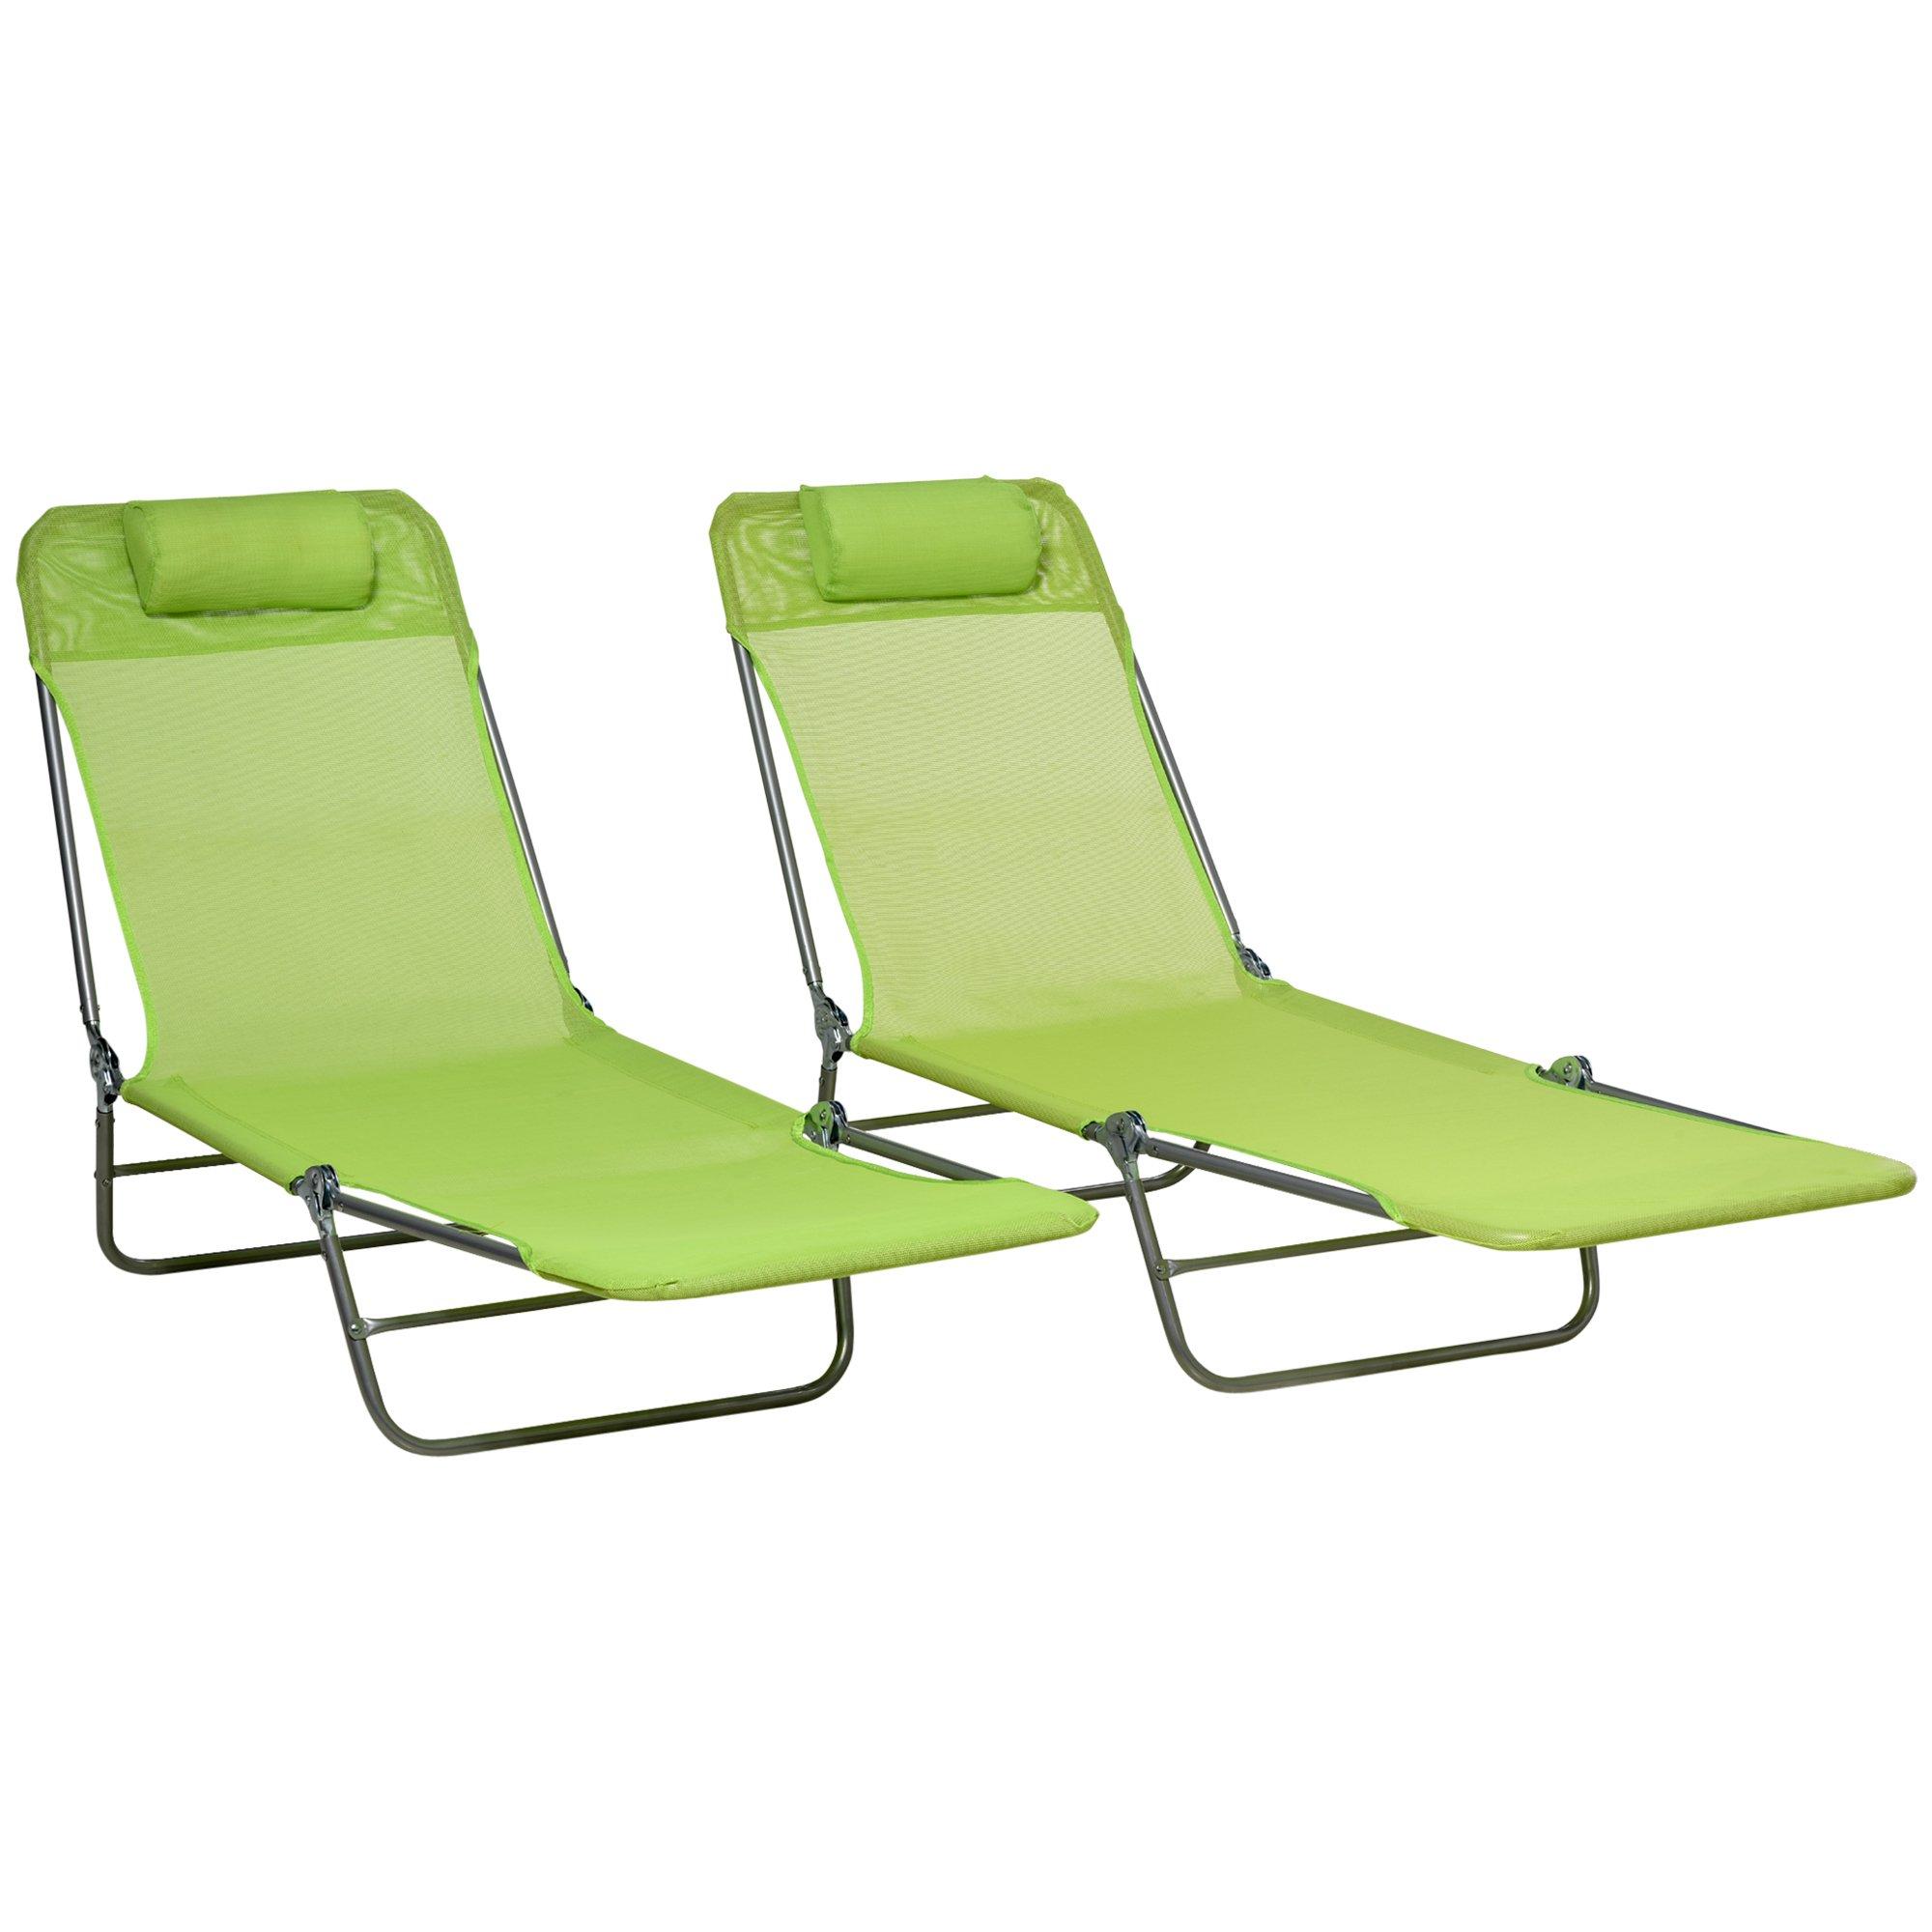 2 Piece Folding Sun Loungers with Adjustable Backrest and Pillow, Green